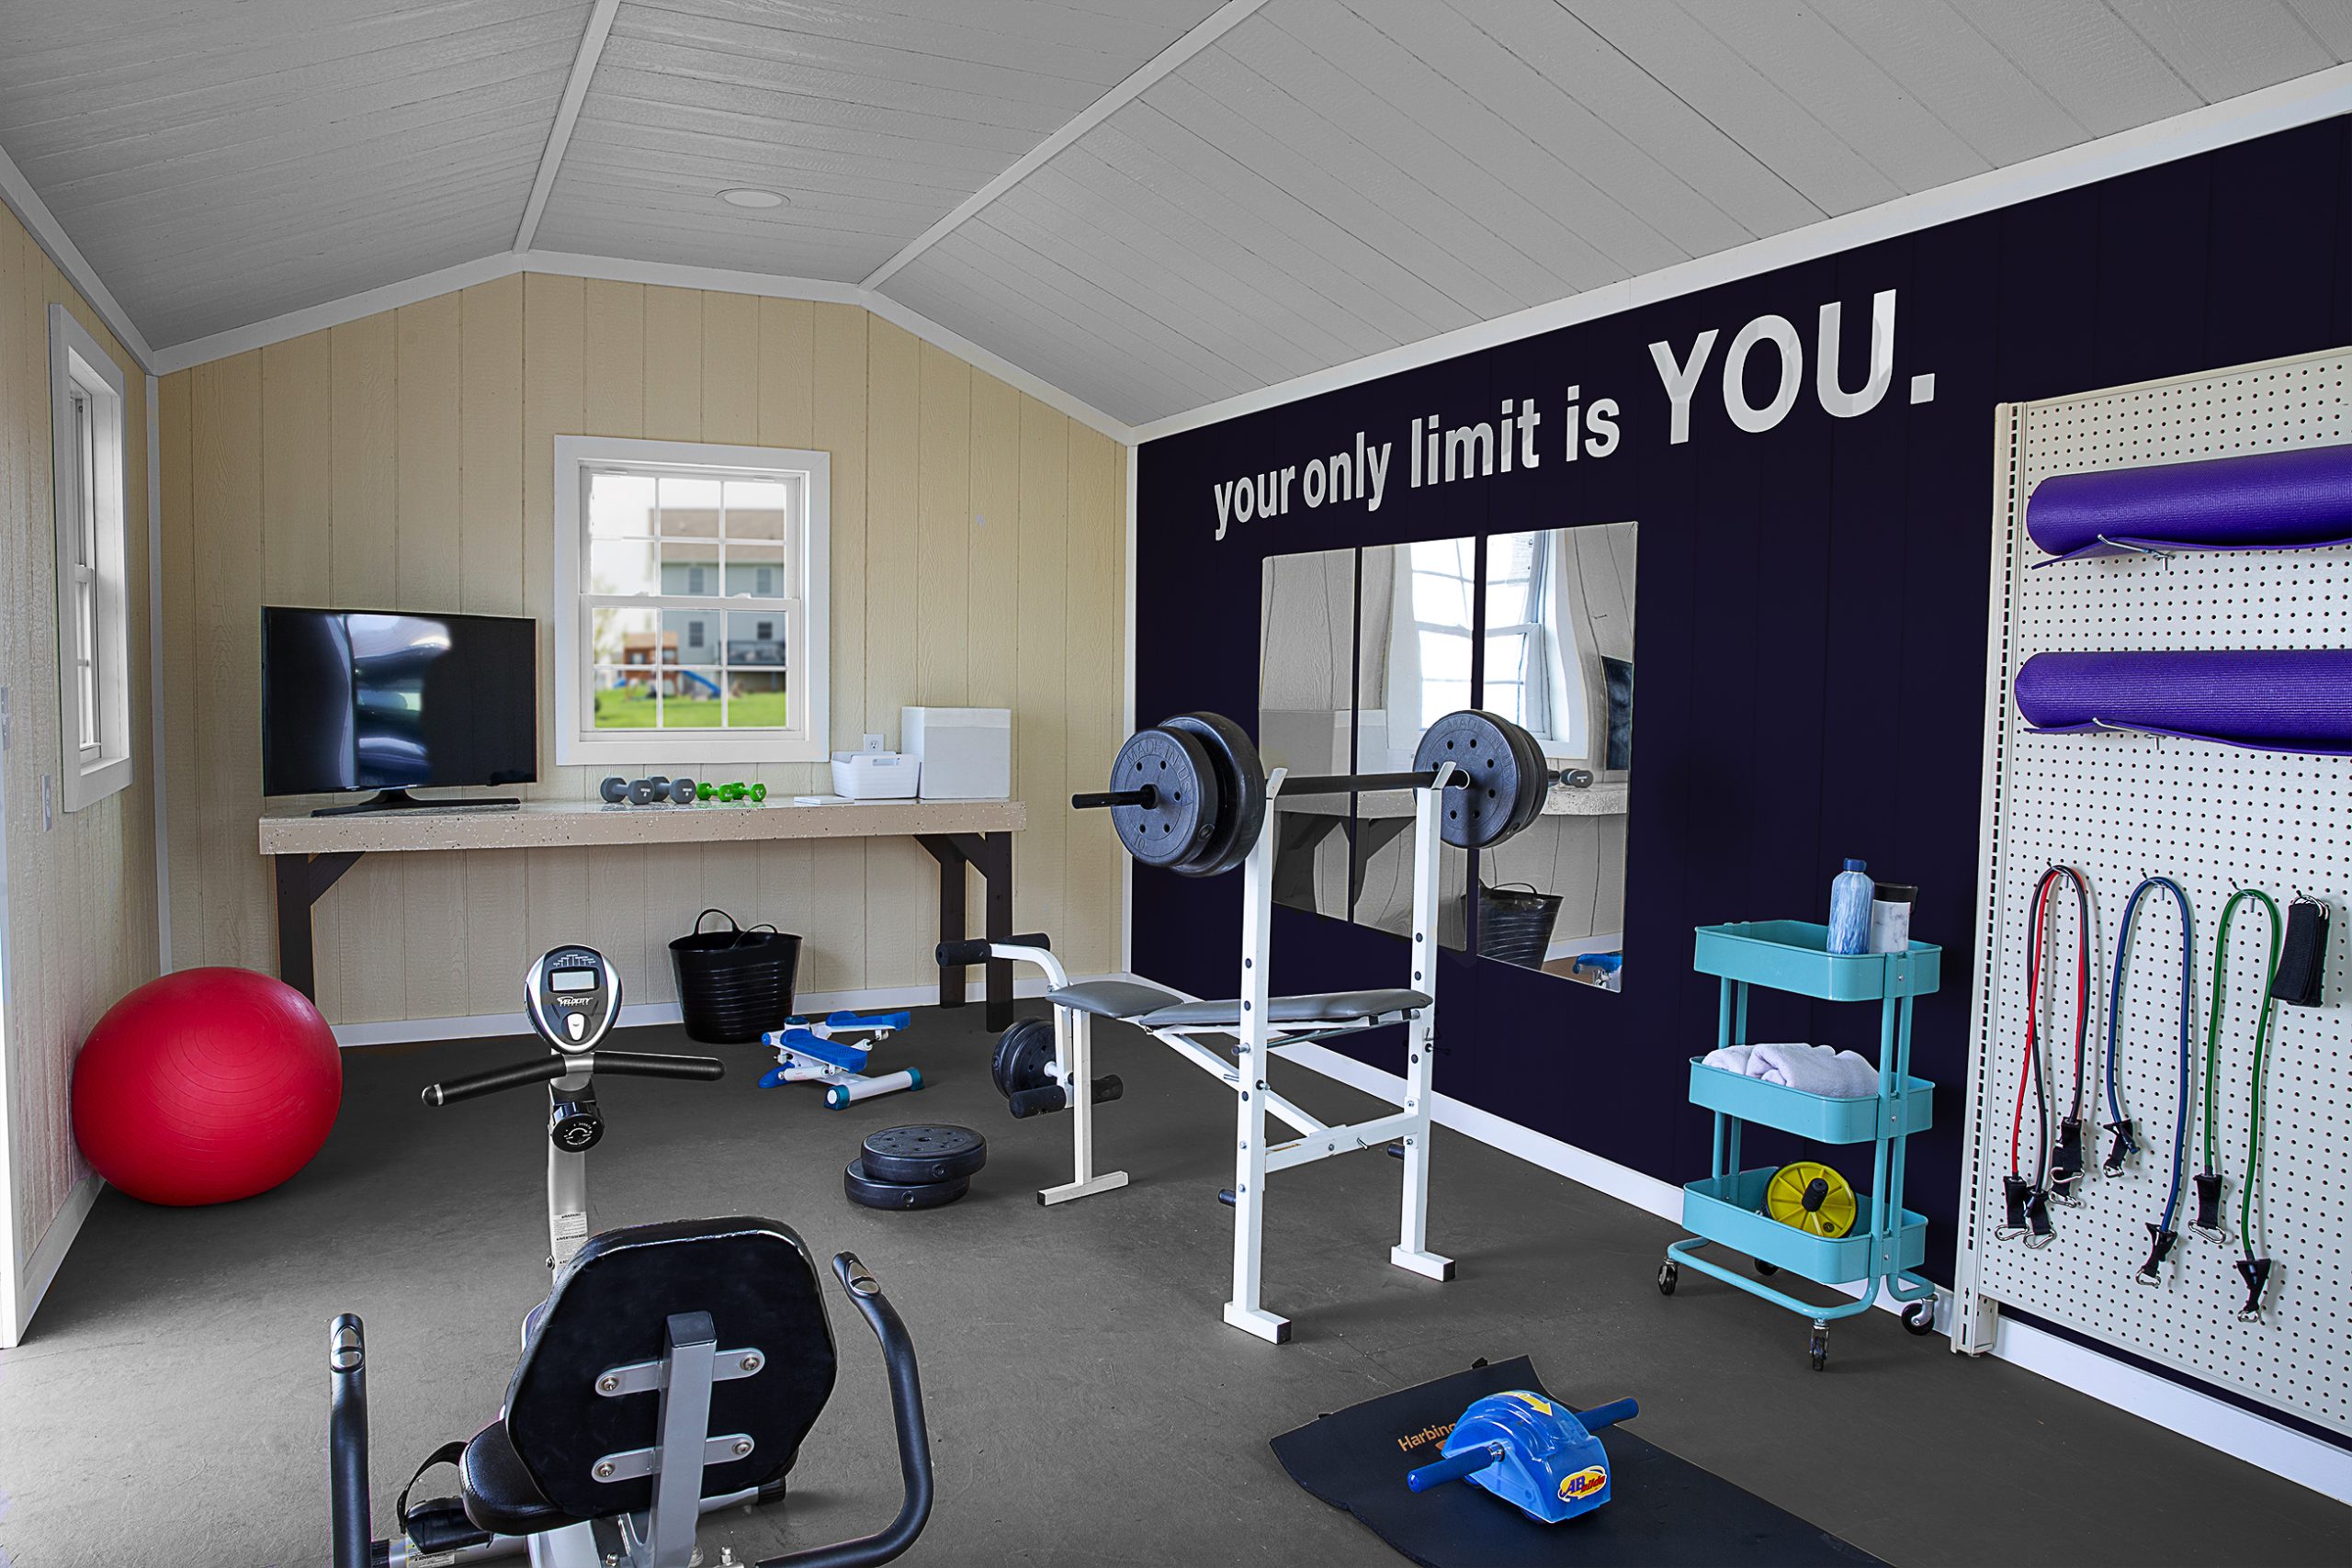 home-gym-inspirational-gallery-showcase-ideas-for-building-product-photography-scaled